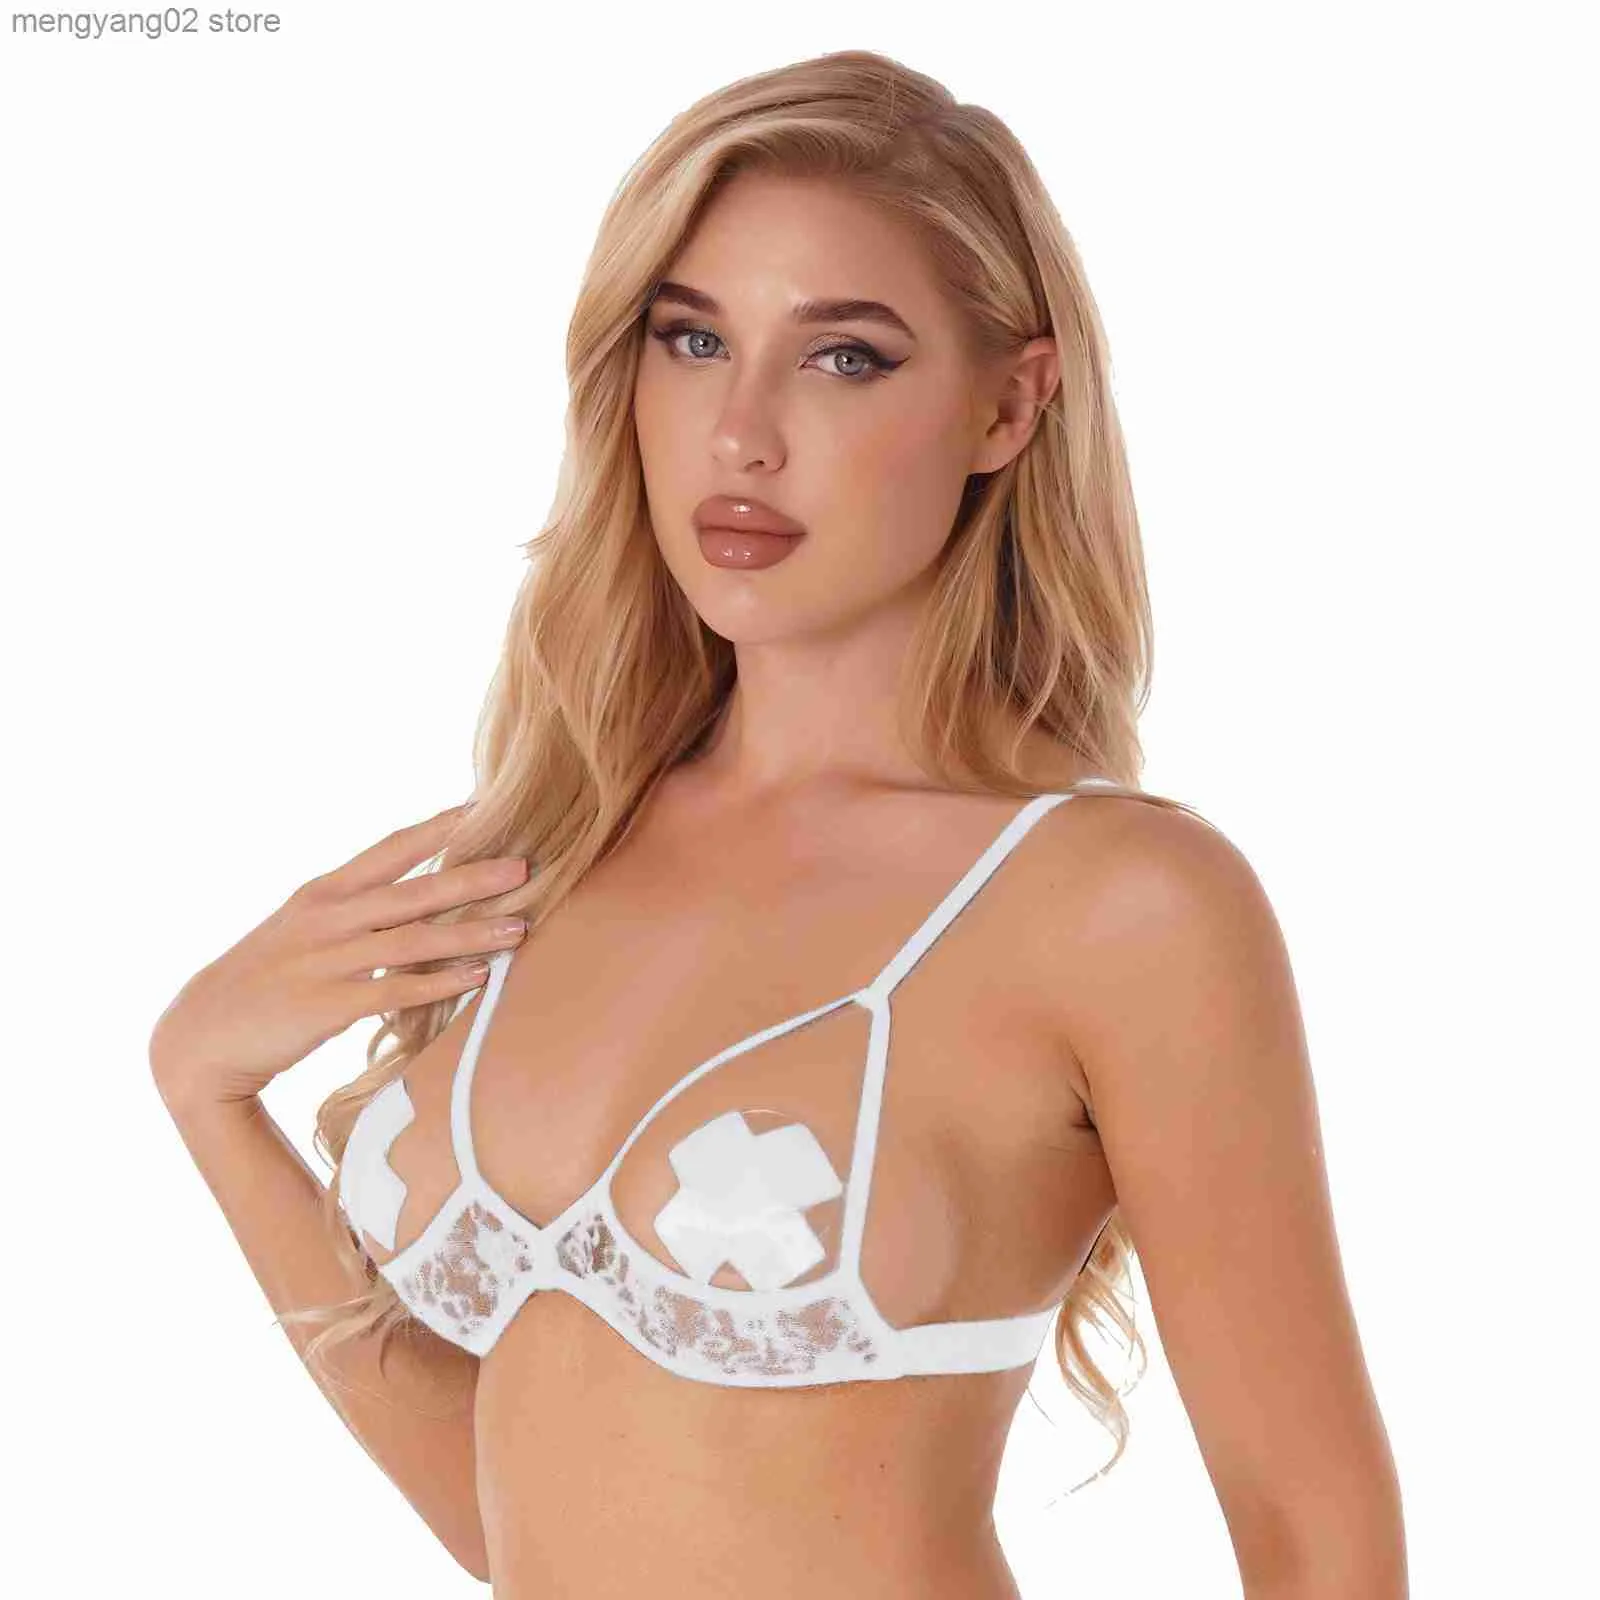 Women See-through Lace Hollow Out Bra Lingerie Exotic Open Cups Exposed  Nipples Chest Brace Underwire Brassiere Top Nightwear